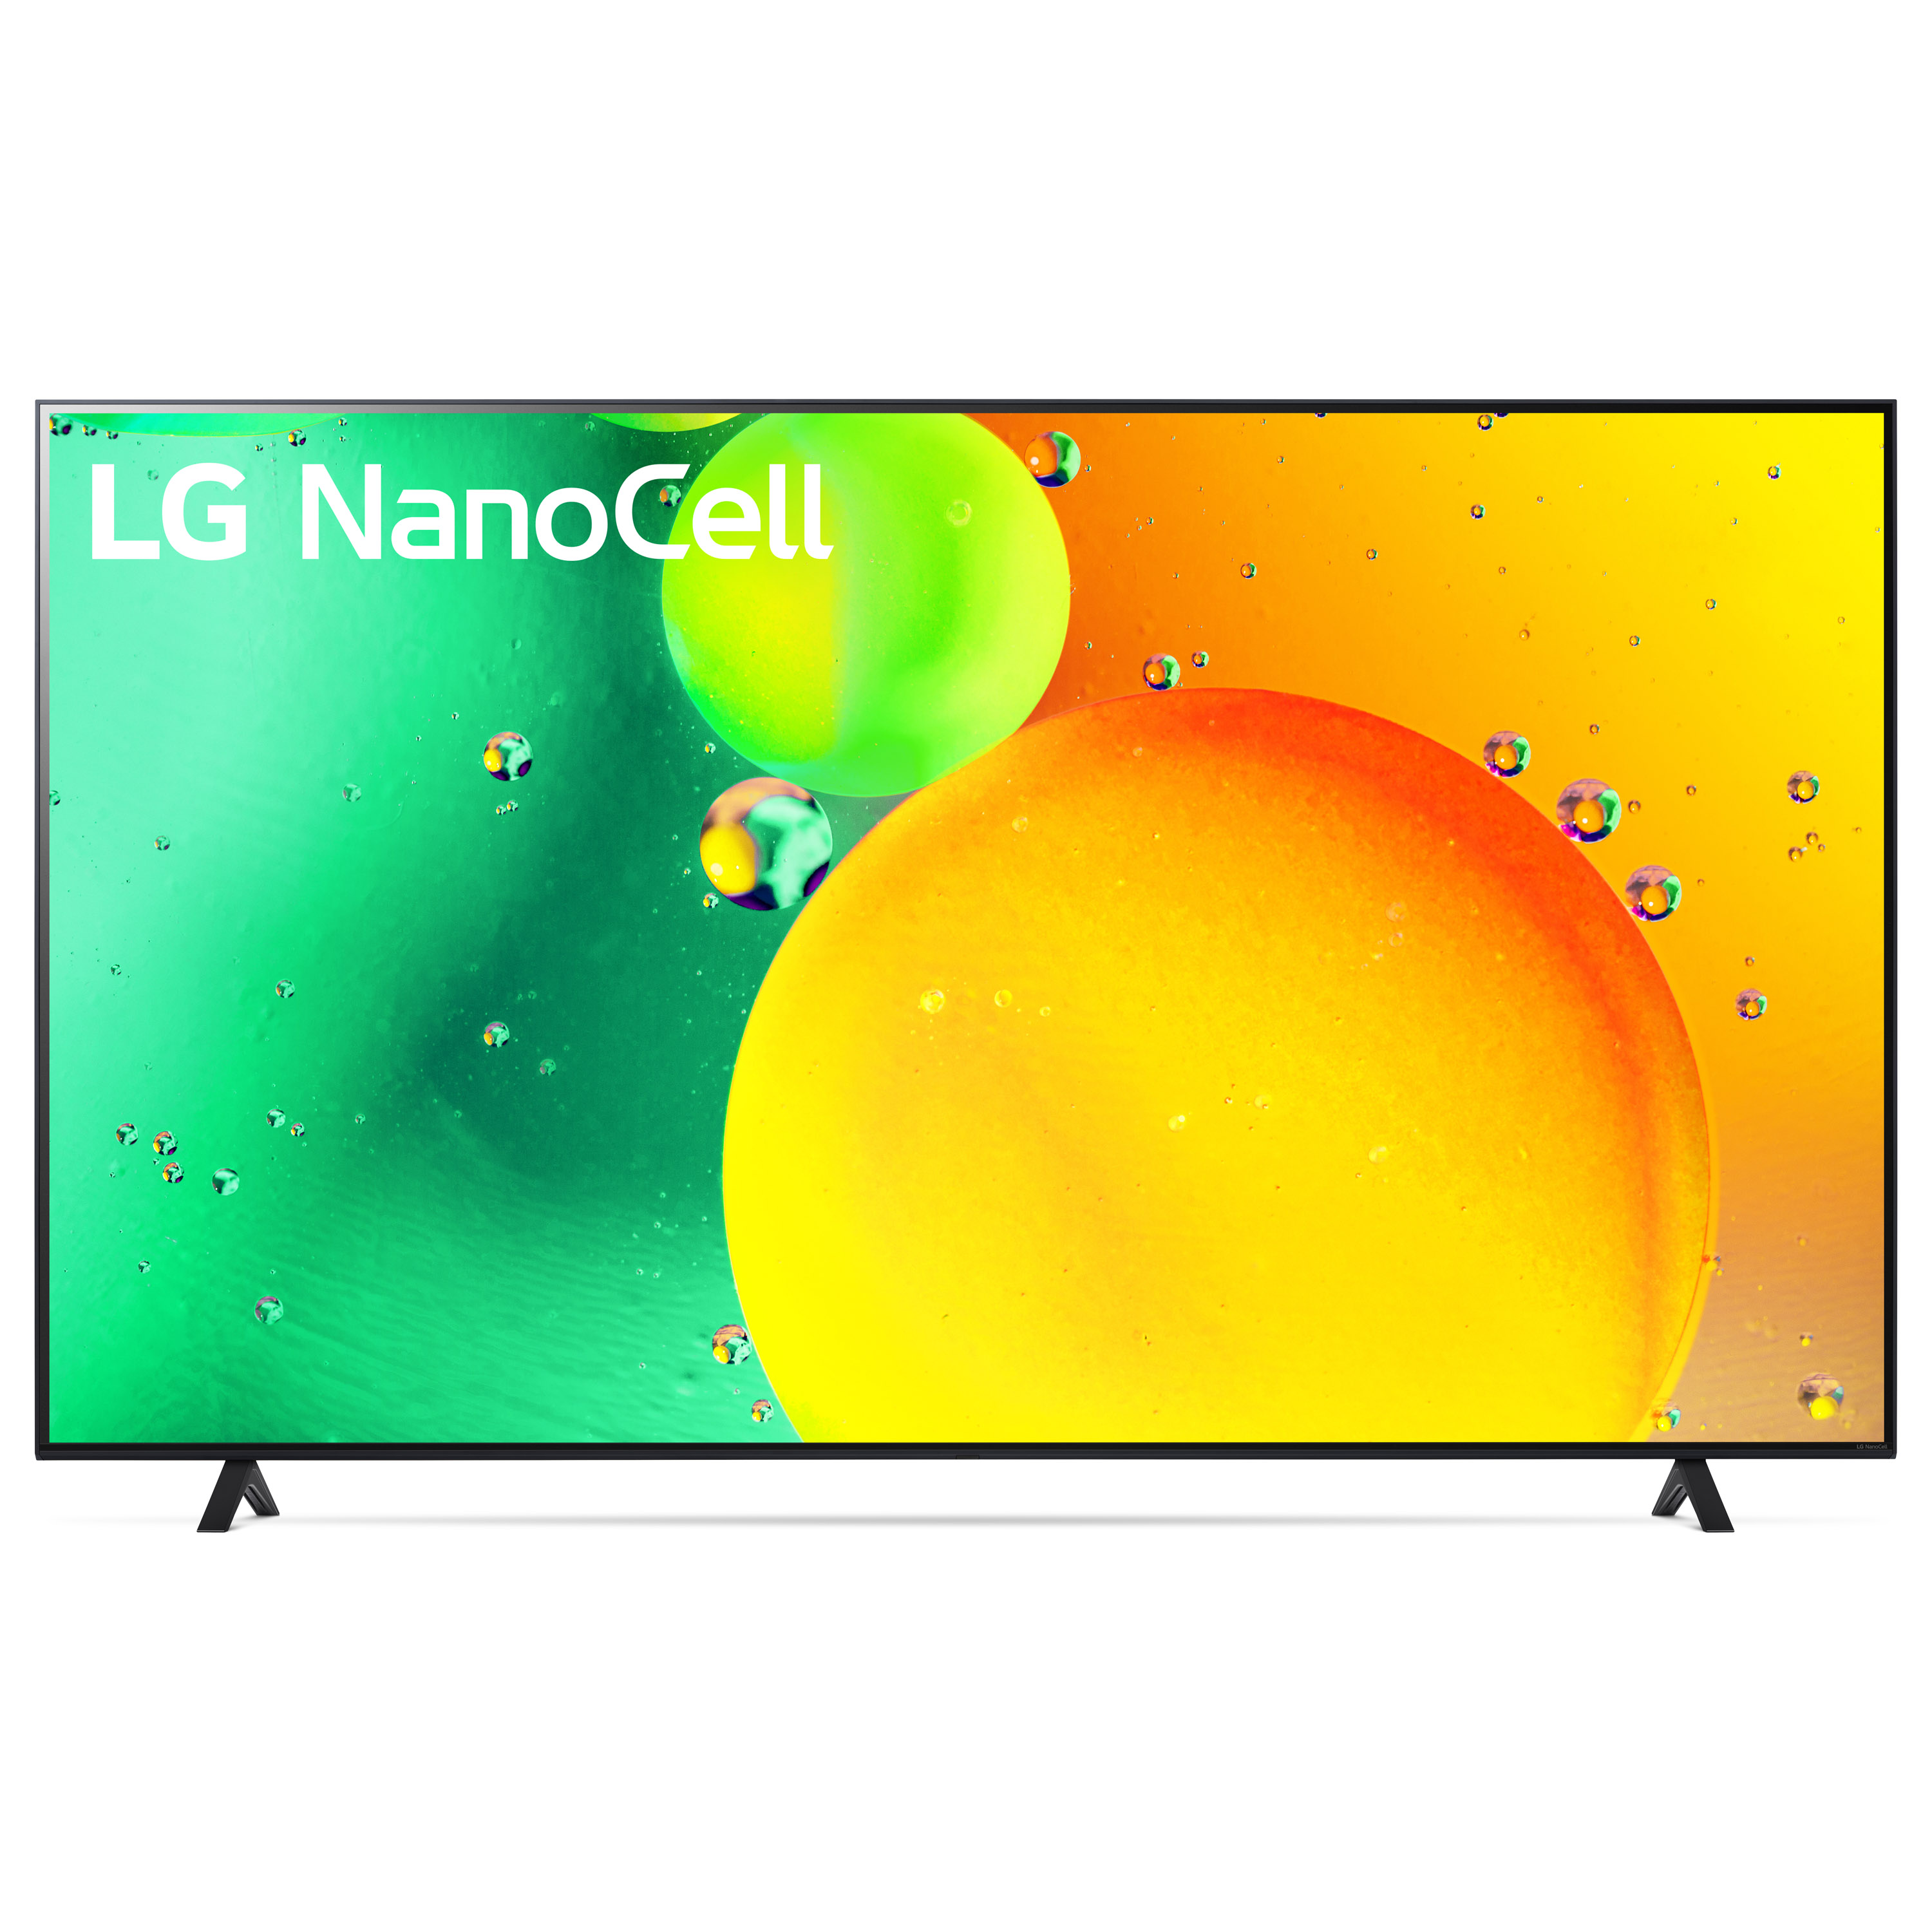 LG 75 inch Class 4K UHD Nano Cell Web OS Smart TV with Active HDR 75 Series 75NANO75UQA - image 1 of 22